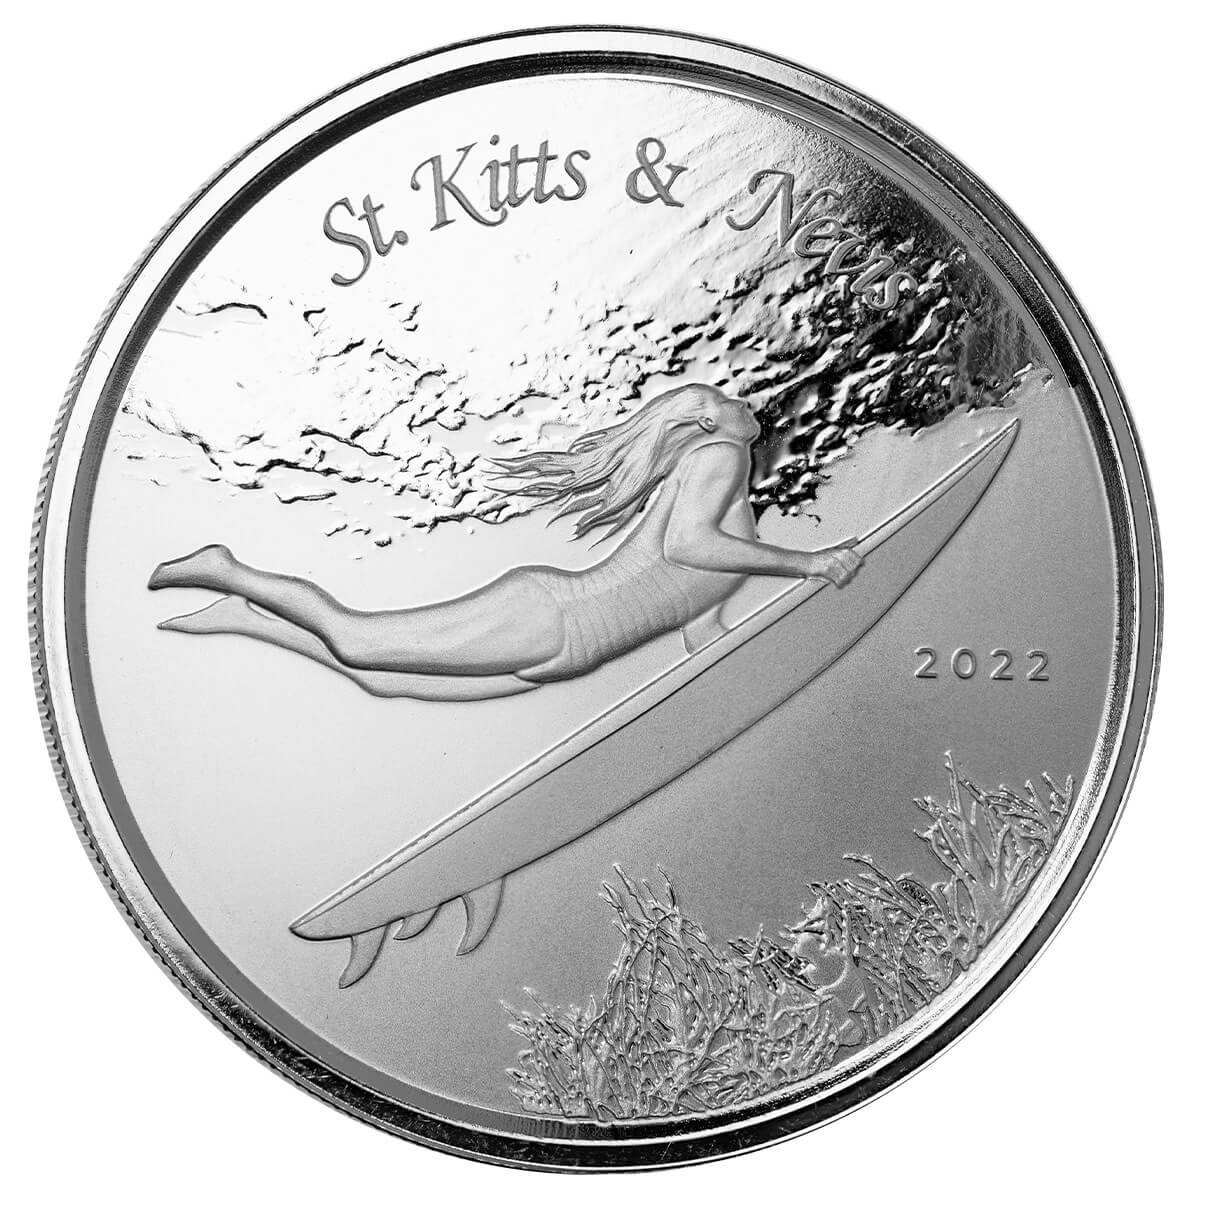 2022 Scottsdale Mint Ec8 St Kitts And Nevis Underwater Surfer 1 Oz Silver Proof Like Coin 04